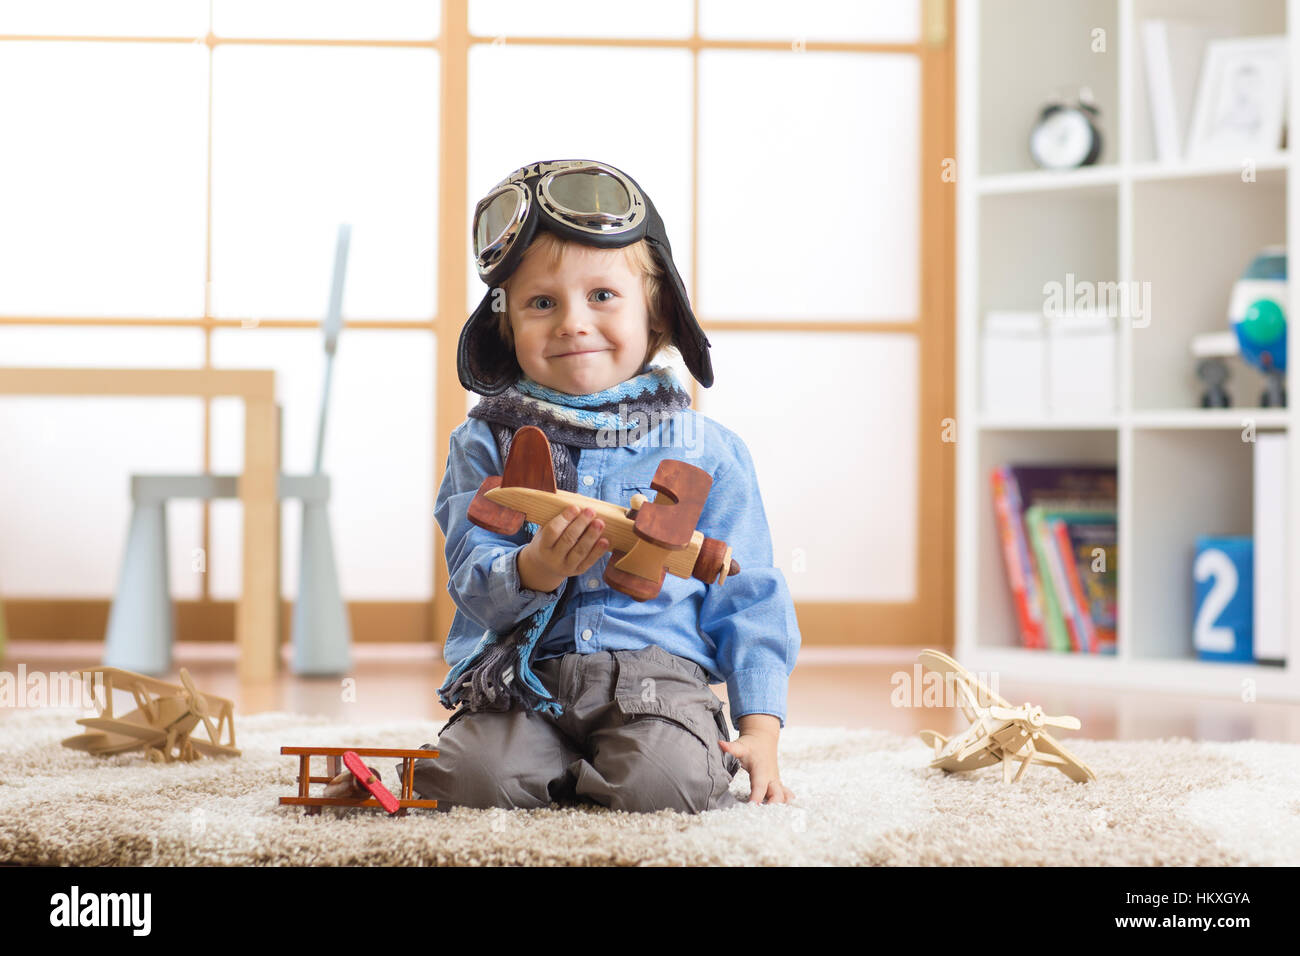 happy kid toddler playing with toy airplane and dreaming of becoming a pilot Stock Photo